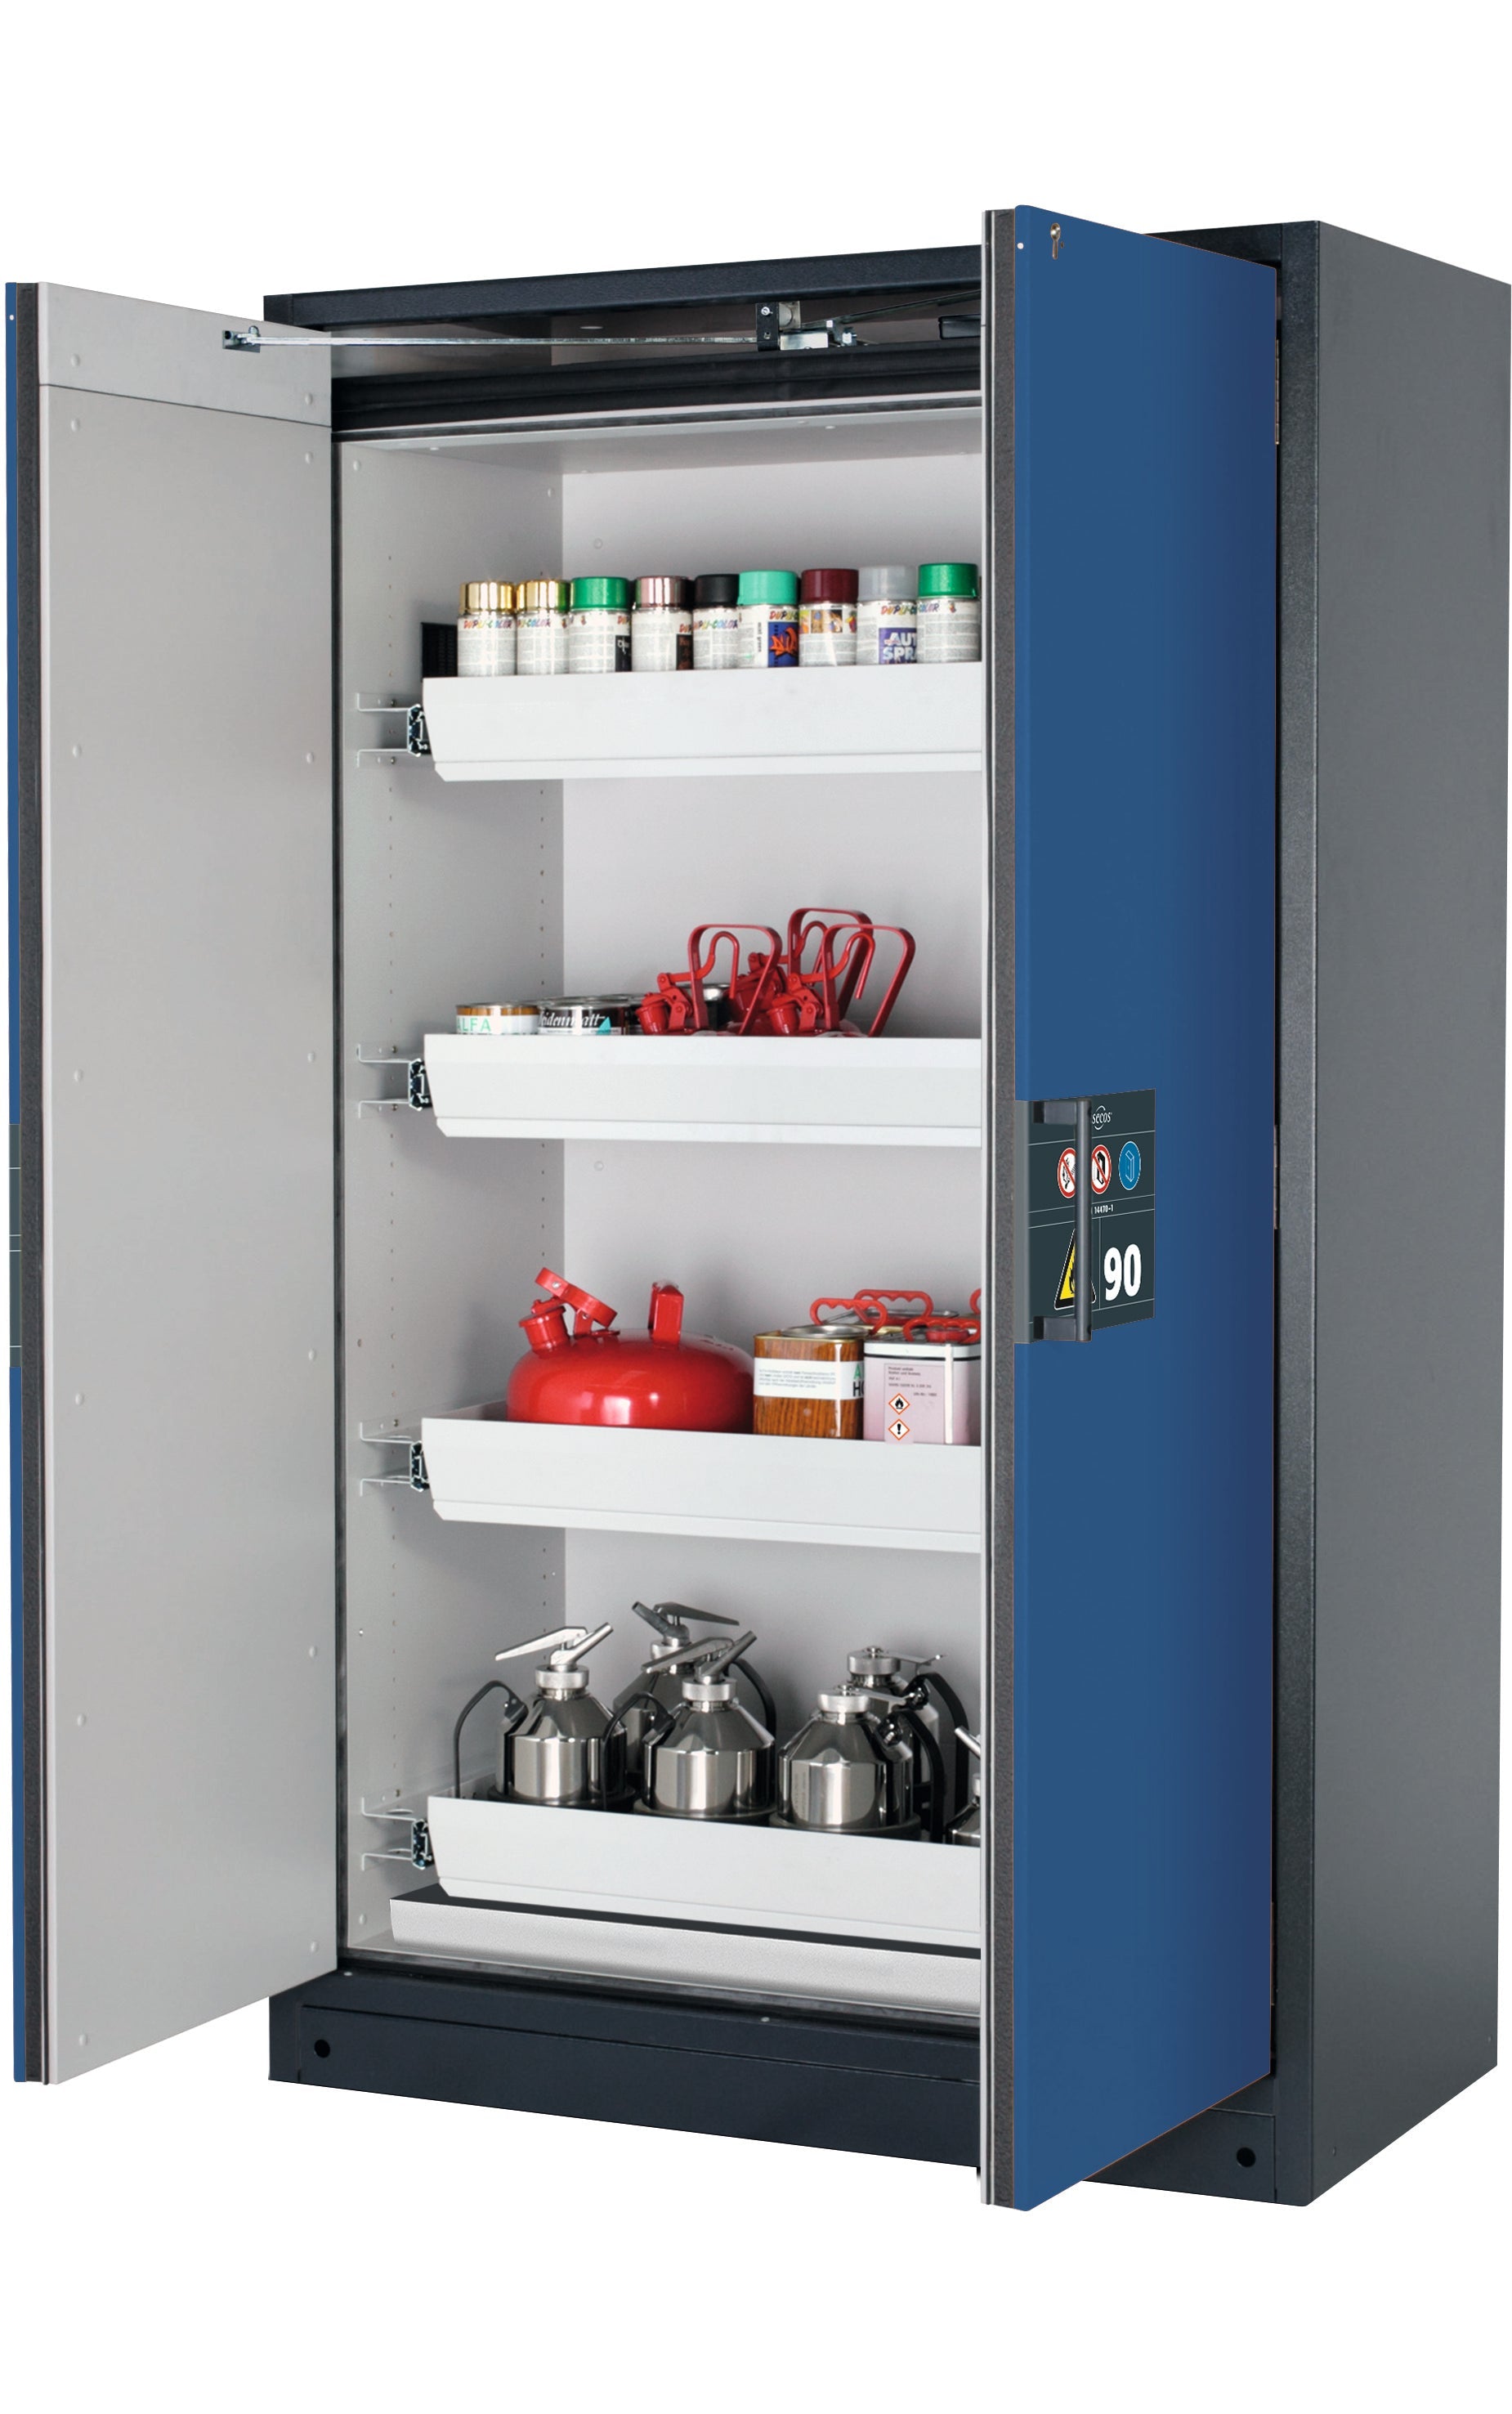 Type 90 safety storage cabinet Q-PEGASUS-90 model Q90.195.120.WDAC in gentian blue RAL 5010 with 4x drawer (standard) (sheet steel),